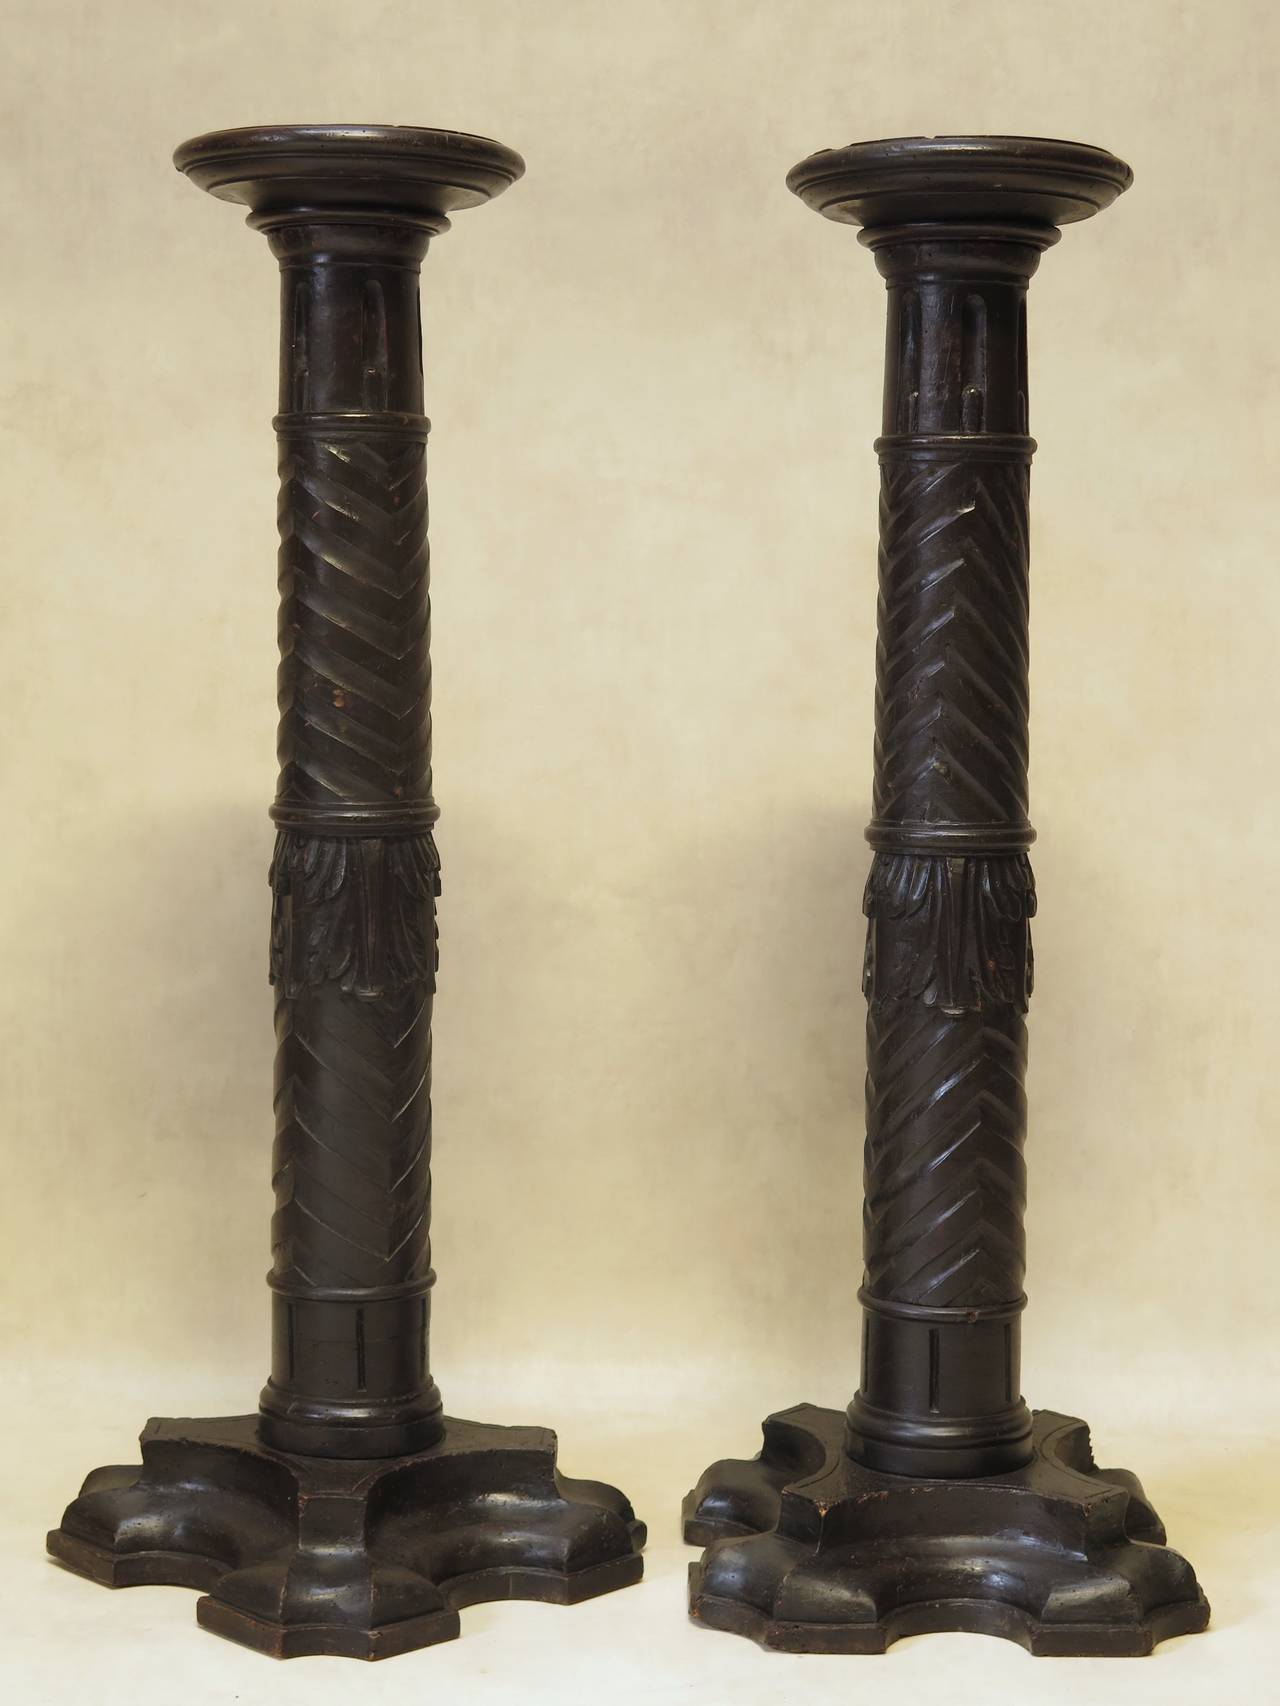 Wonderful pair of unusual antique hand-carved pedestals, with chevron motif and acanthus leaf detail mid-stem. Lovely bases.